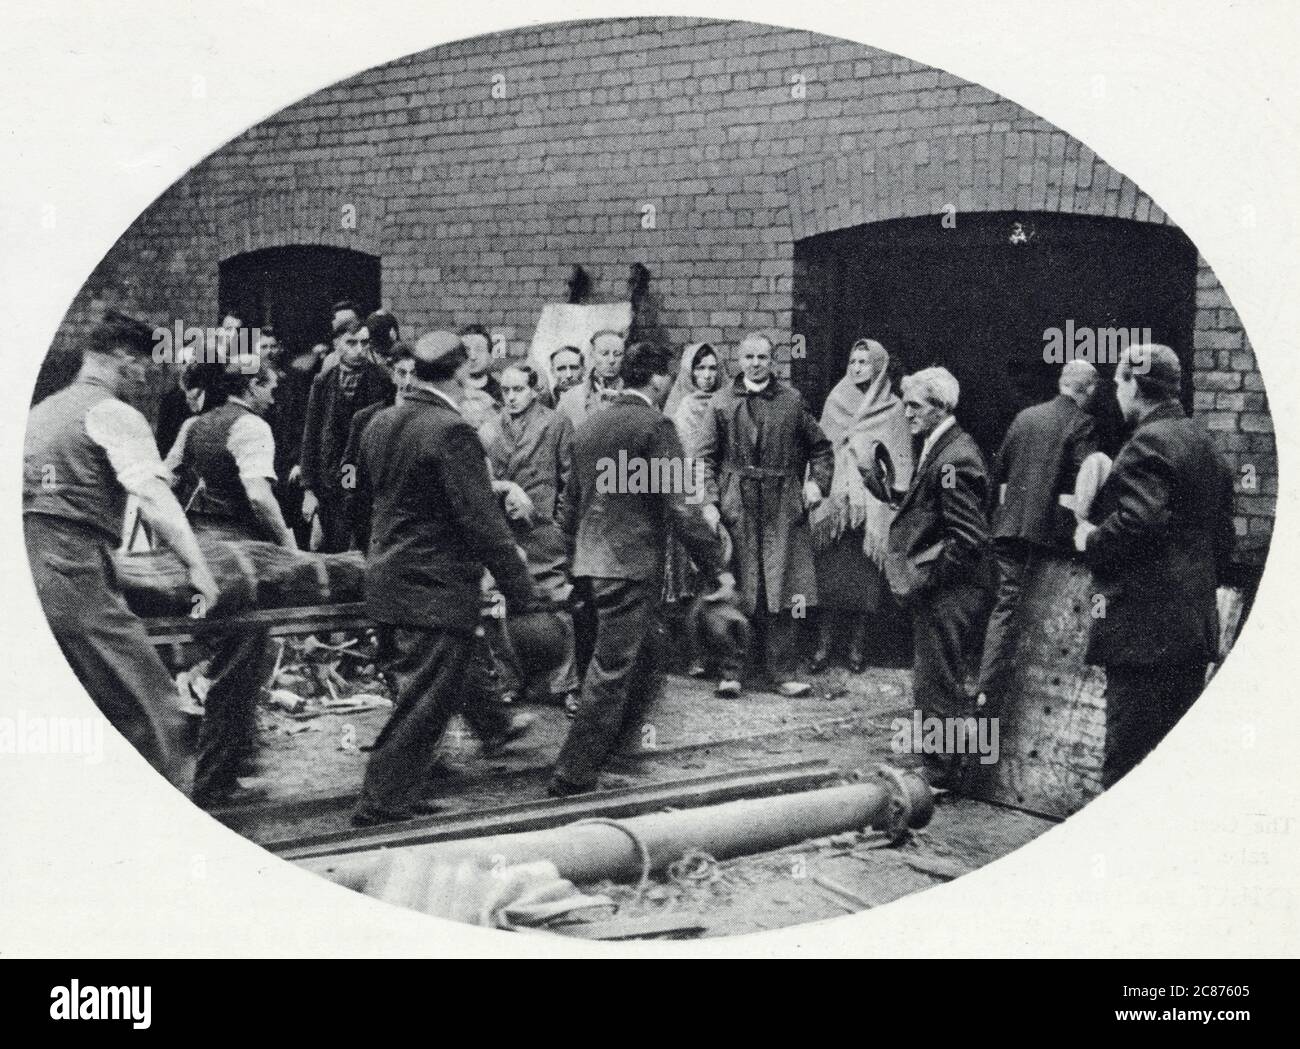 Bickershaw Colliery in Lancashire where coal-mine disaster happened on the 10 October 1932. A mine-shaft elevator carrying 20 people fell at the mine, killing all but one person. Photograph showing the rescue party bringing out one of the deceased.     Date: October 1932 Stock Photo